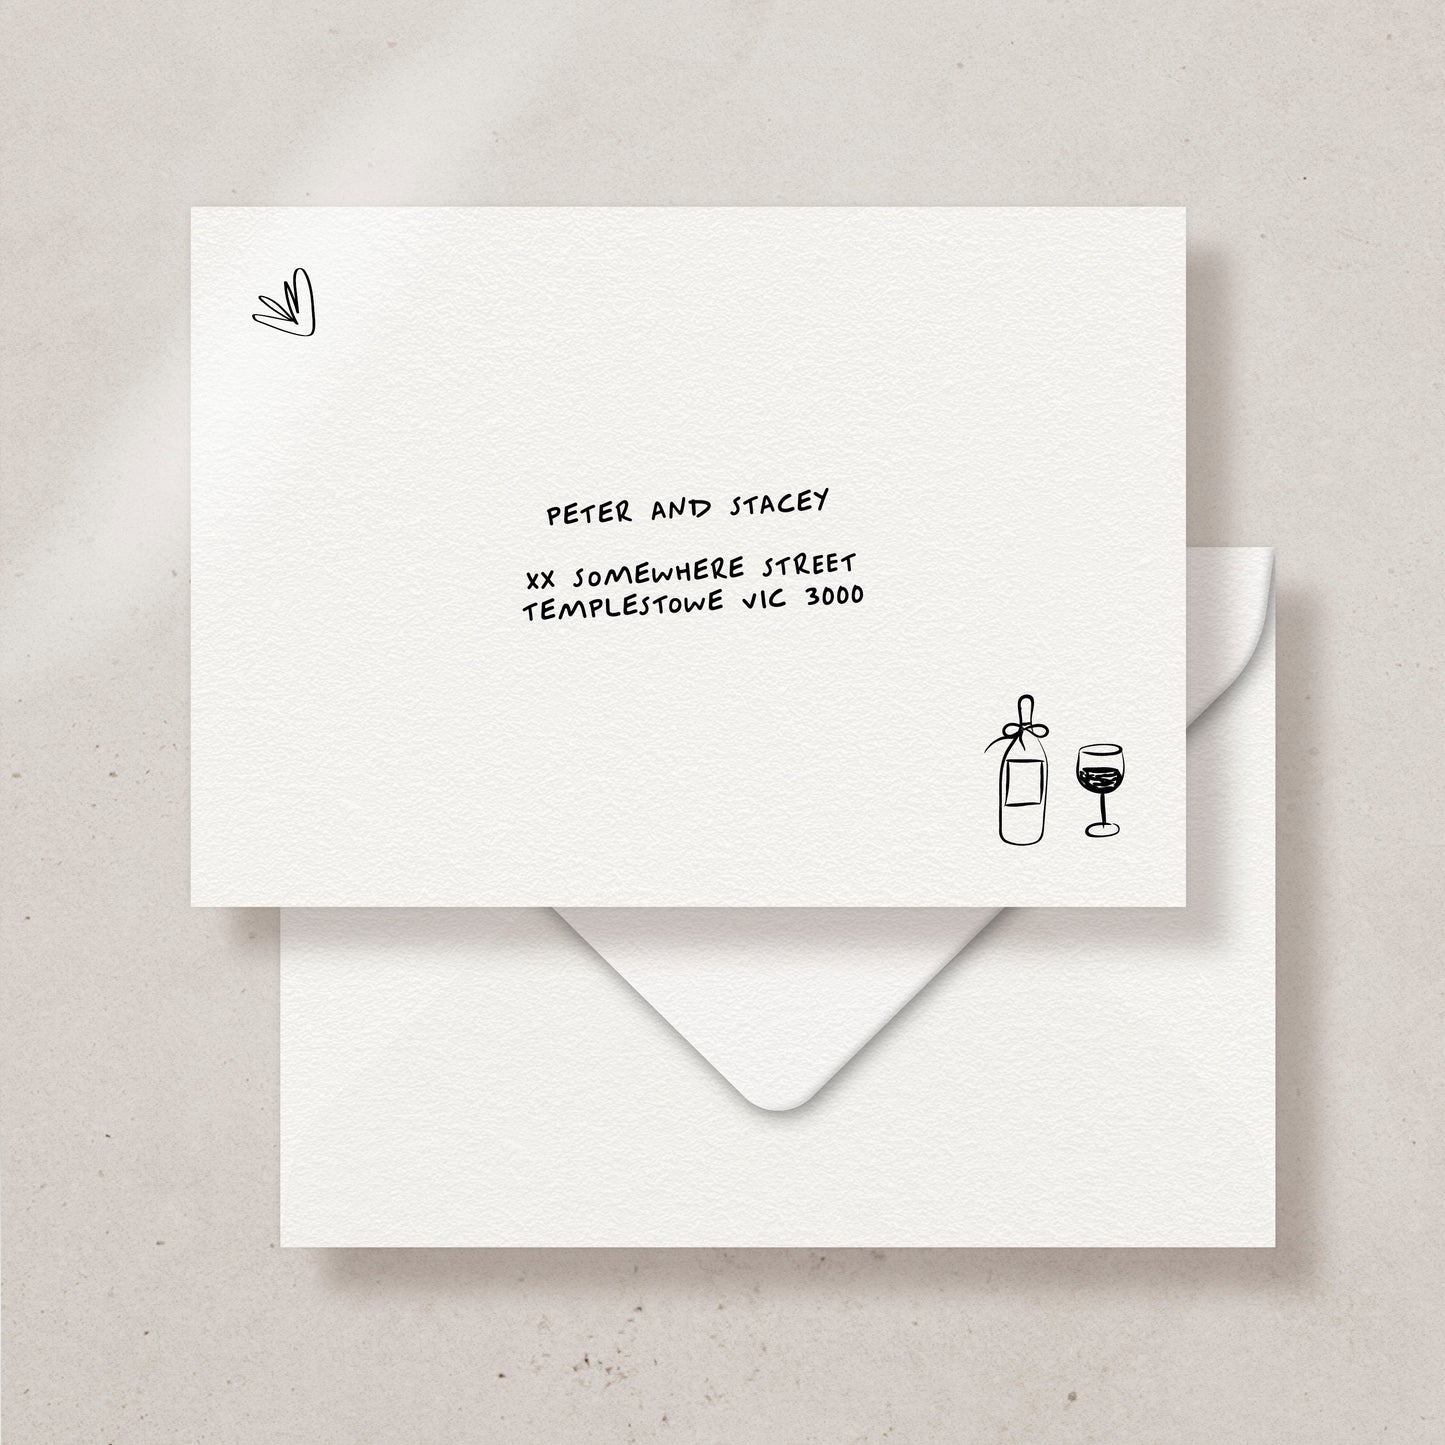 Baciami Save the date/Thank you card Envelope